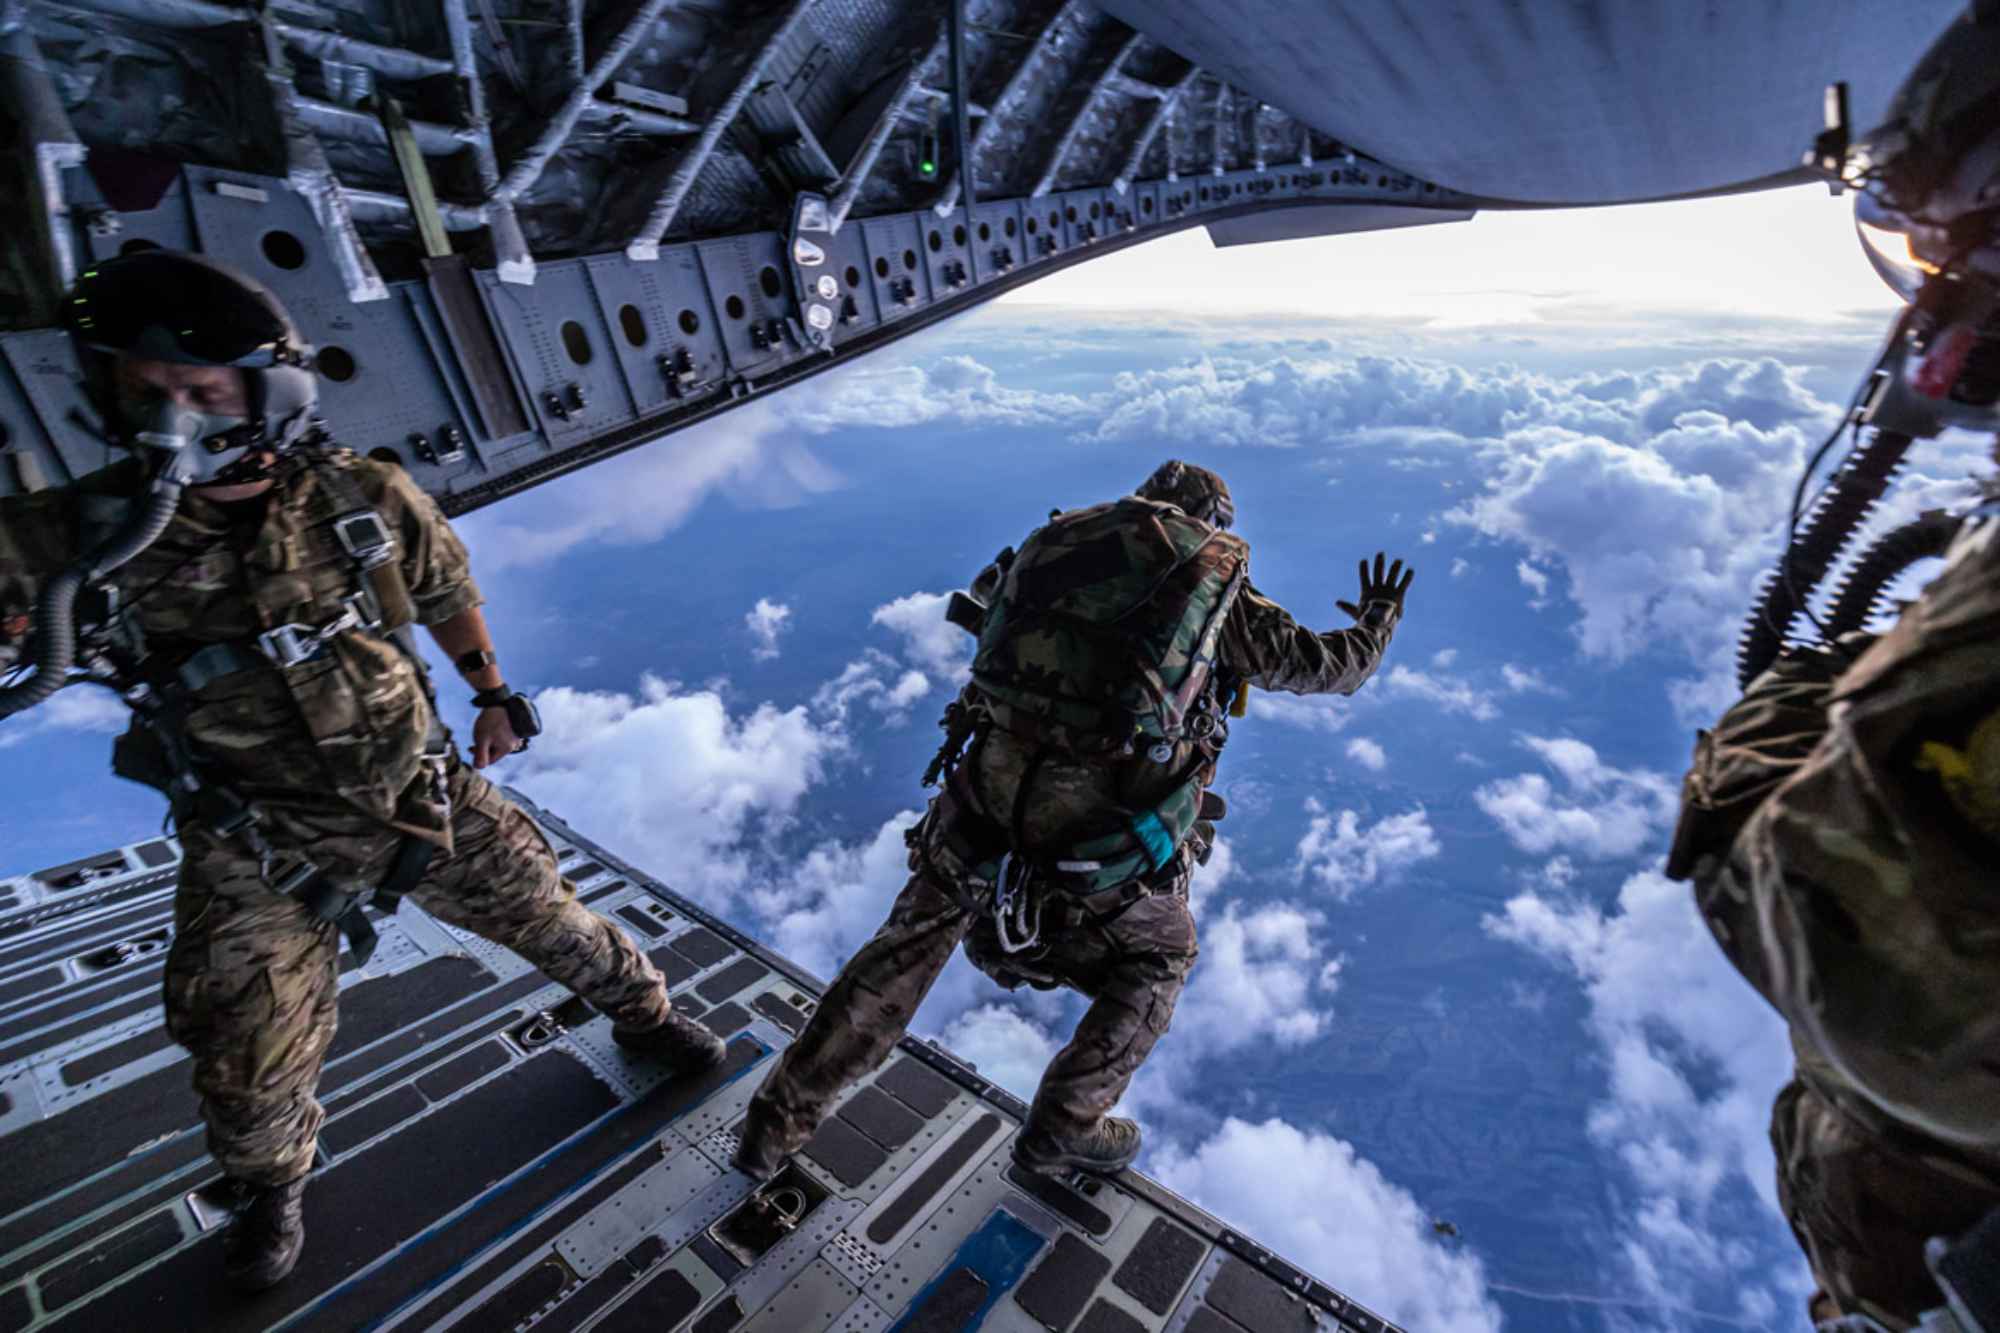 Three British military paratroopers at the back of an aircraft with one leaping into the open sky below.